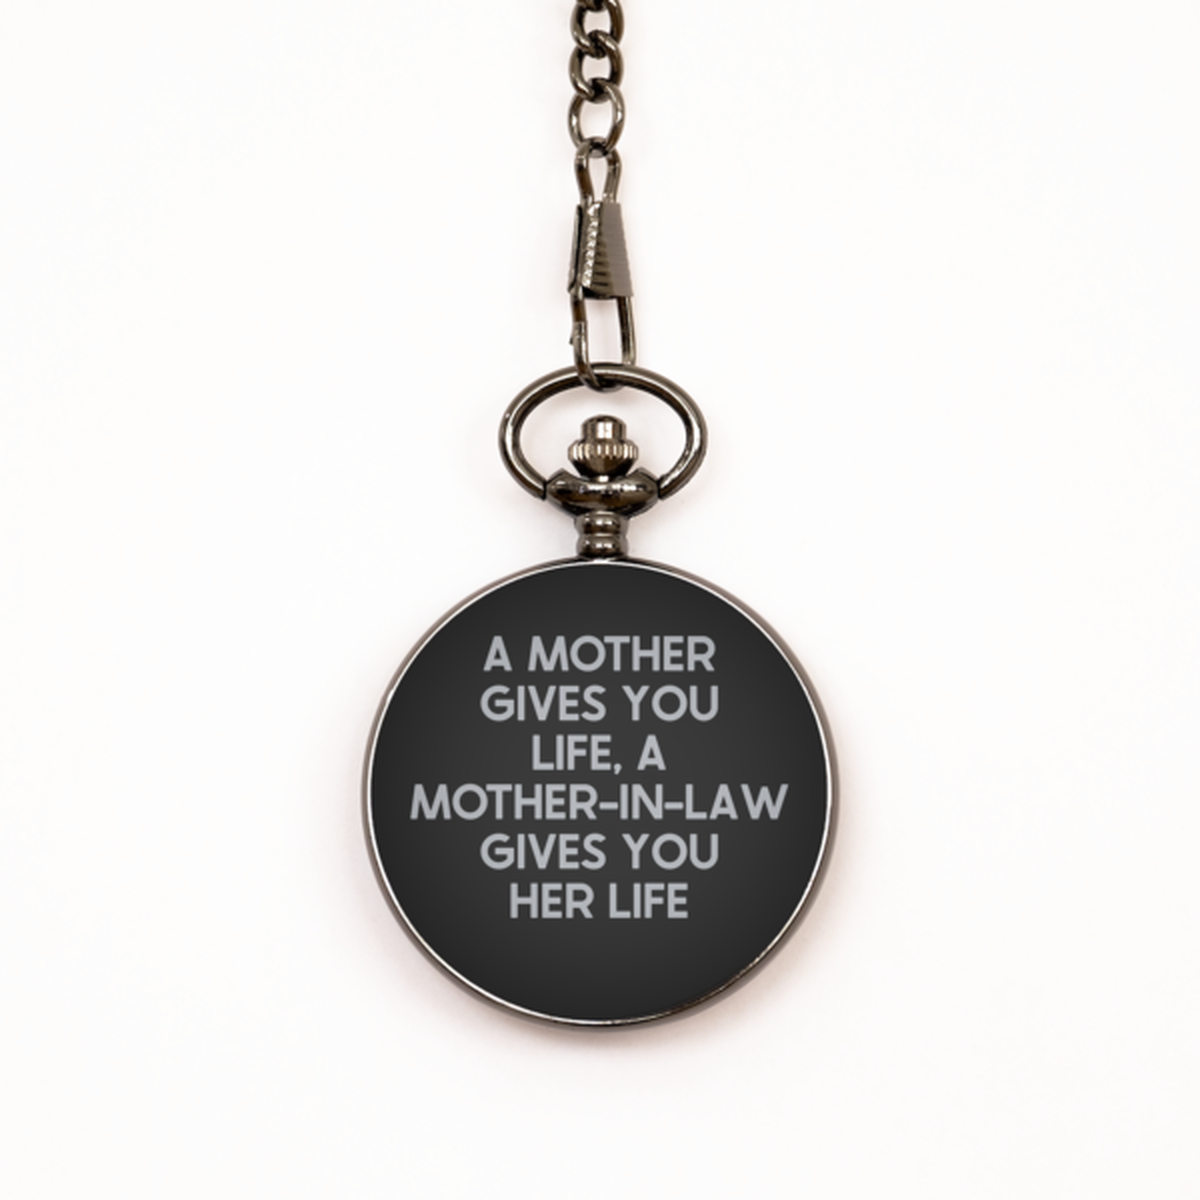 To My Mother-In-Law Black Pocket Watch, Gives You Life, Mothers Day Gifts For Mother-In-Law From Daughter-In-Law, Birthday Gifts For Women